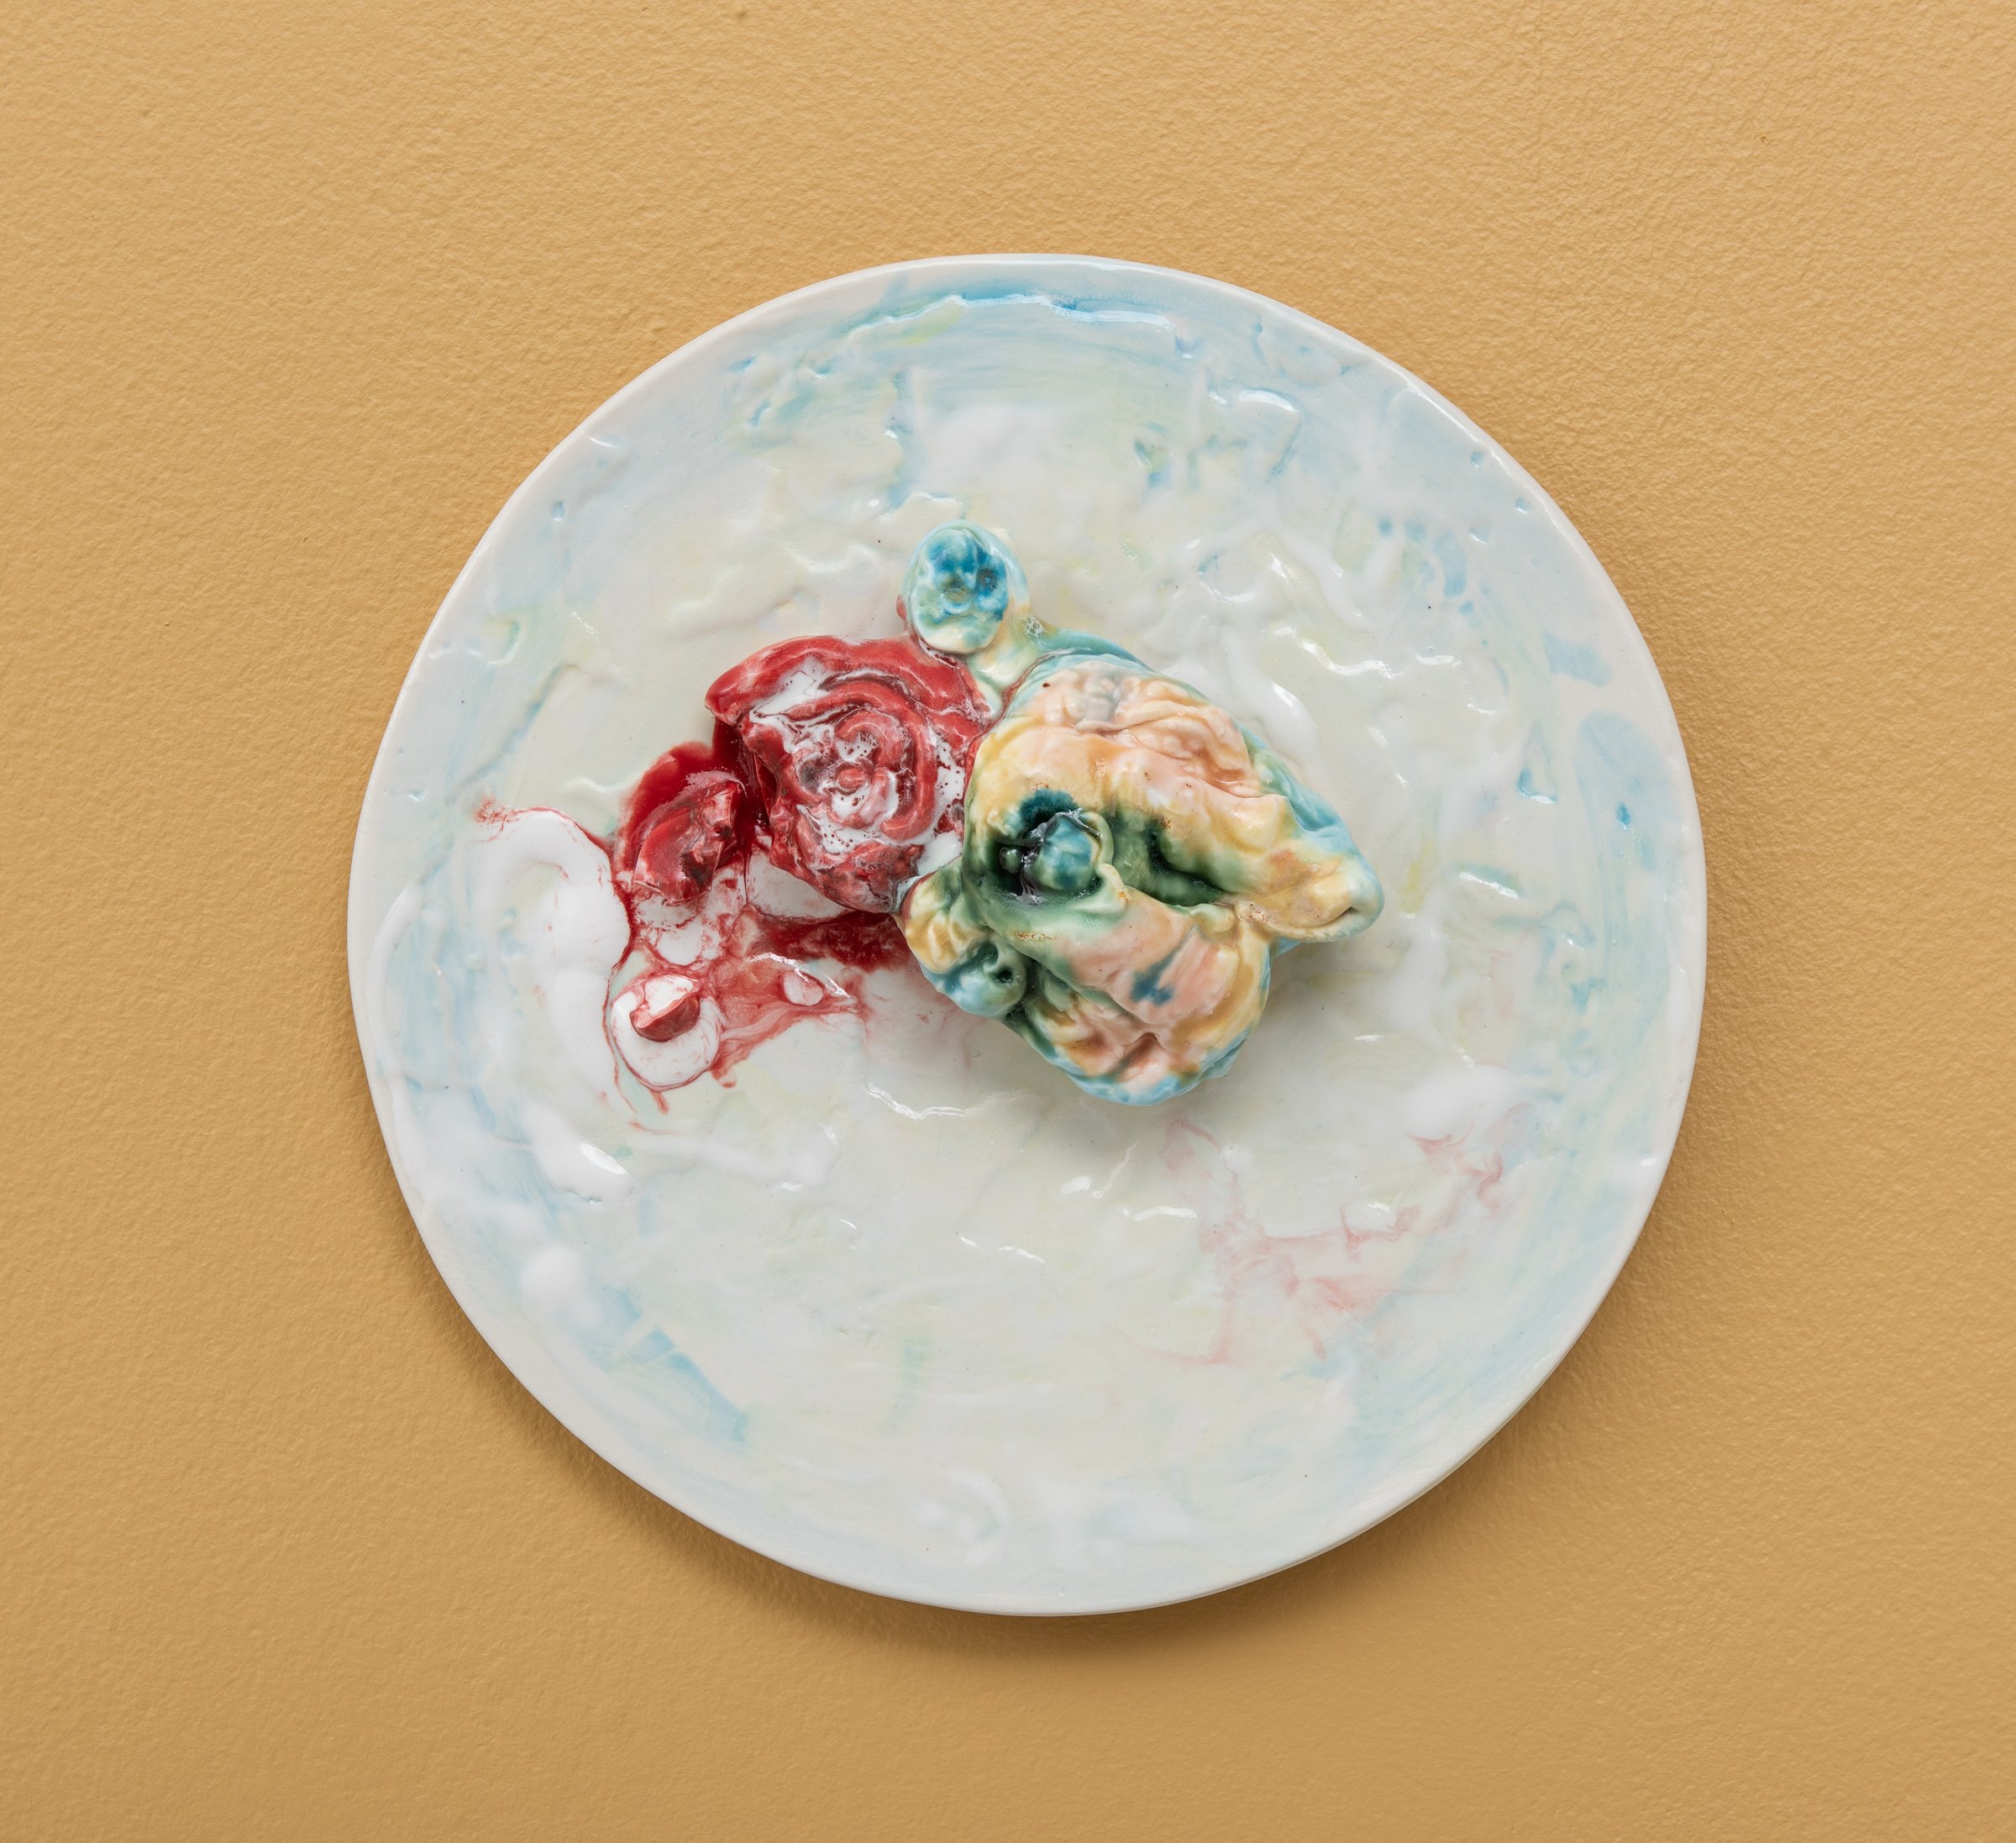  Why do Europeans put plates on their walls? II | 2022  Porcelain, glazes, porcelain decals and tissue paper, press molding. 27x27x7cm  Photo: Thomas Tveter 